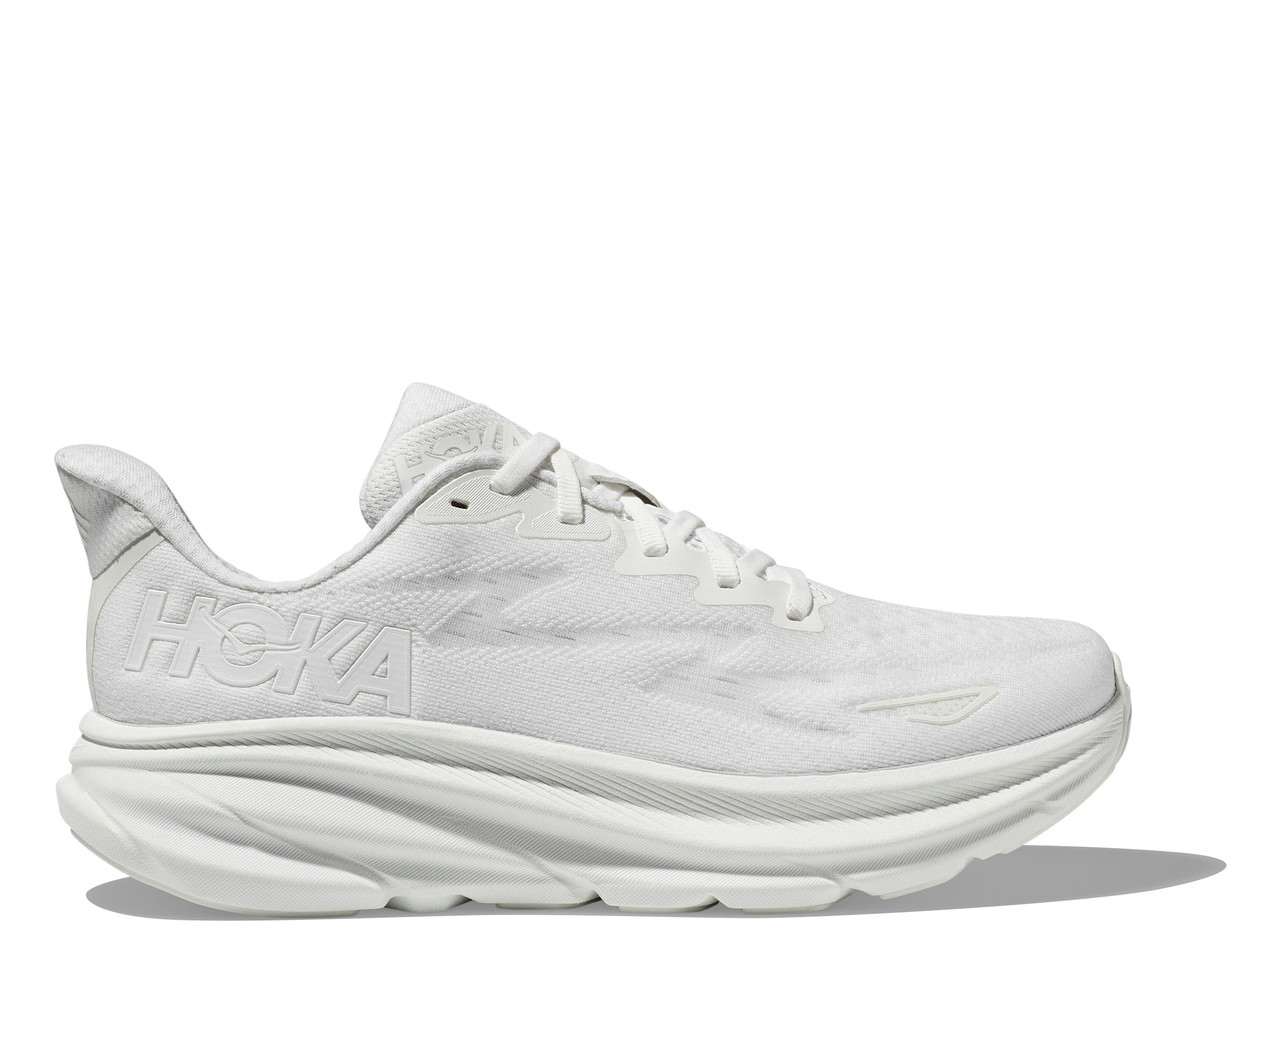 Clifton 9 Road Running Shoes White/White